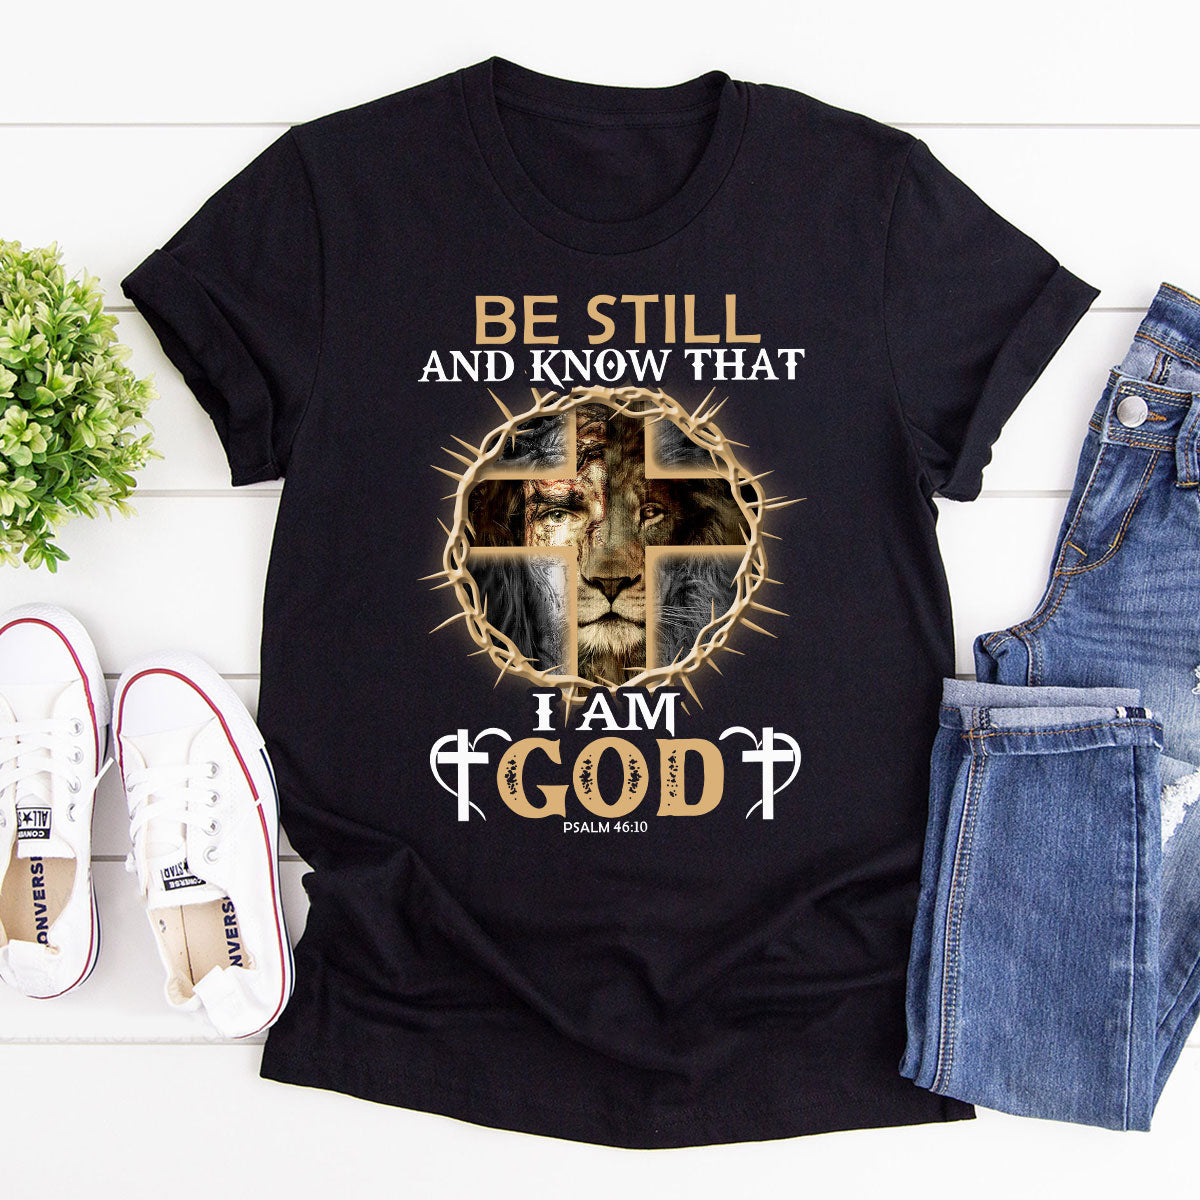 Be Still And Know That I Am God - Unique Christian Unisex T-shirt HIM2 ...